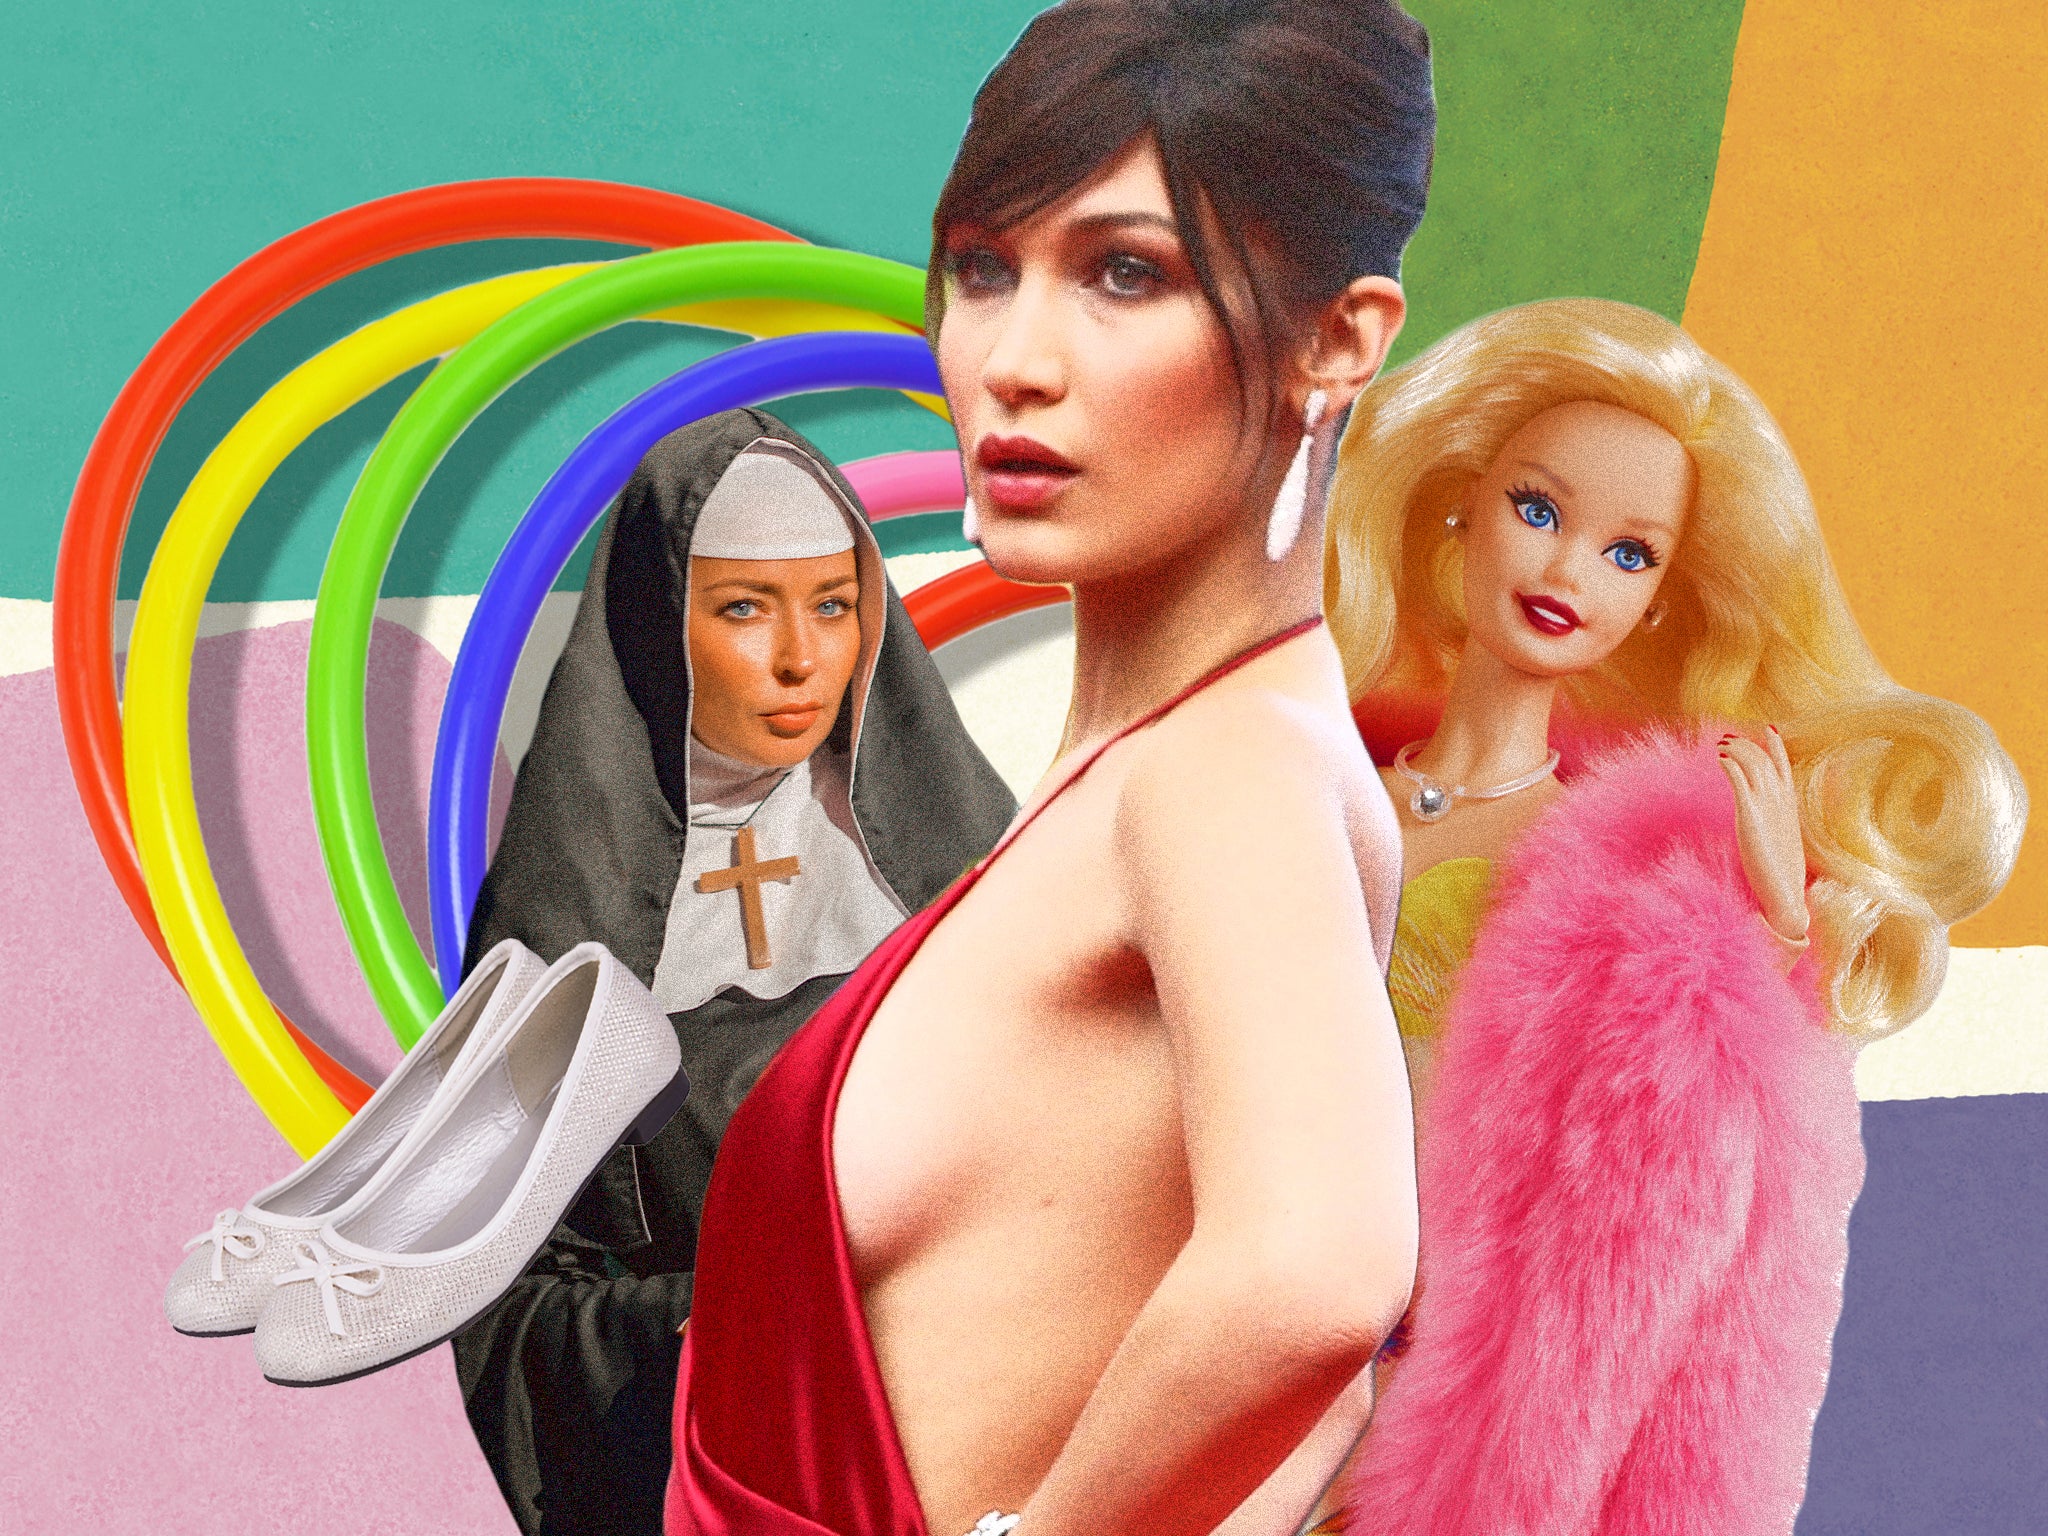 A 2023 moodboard, from ballet flats and nuns to side boob and Barbie dolls